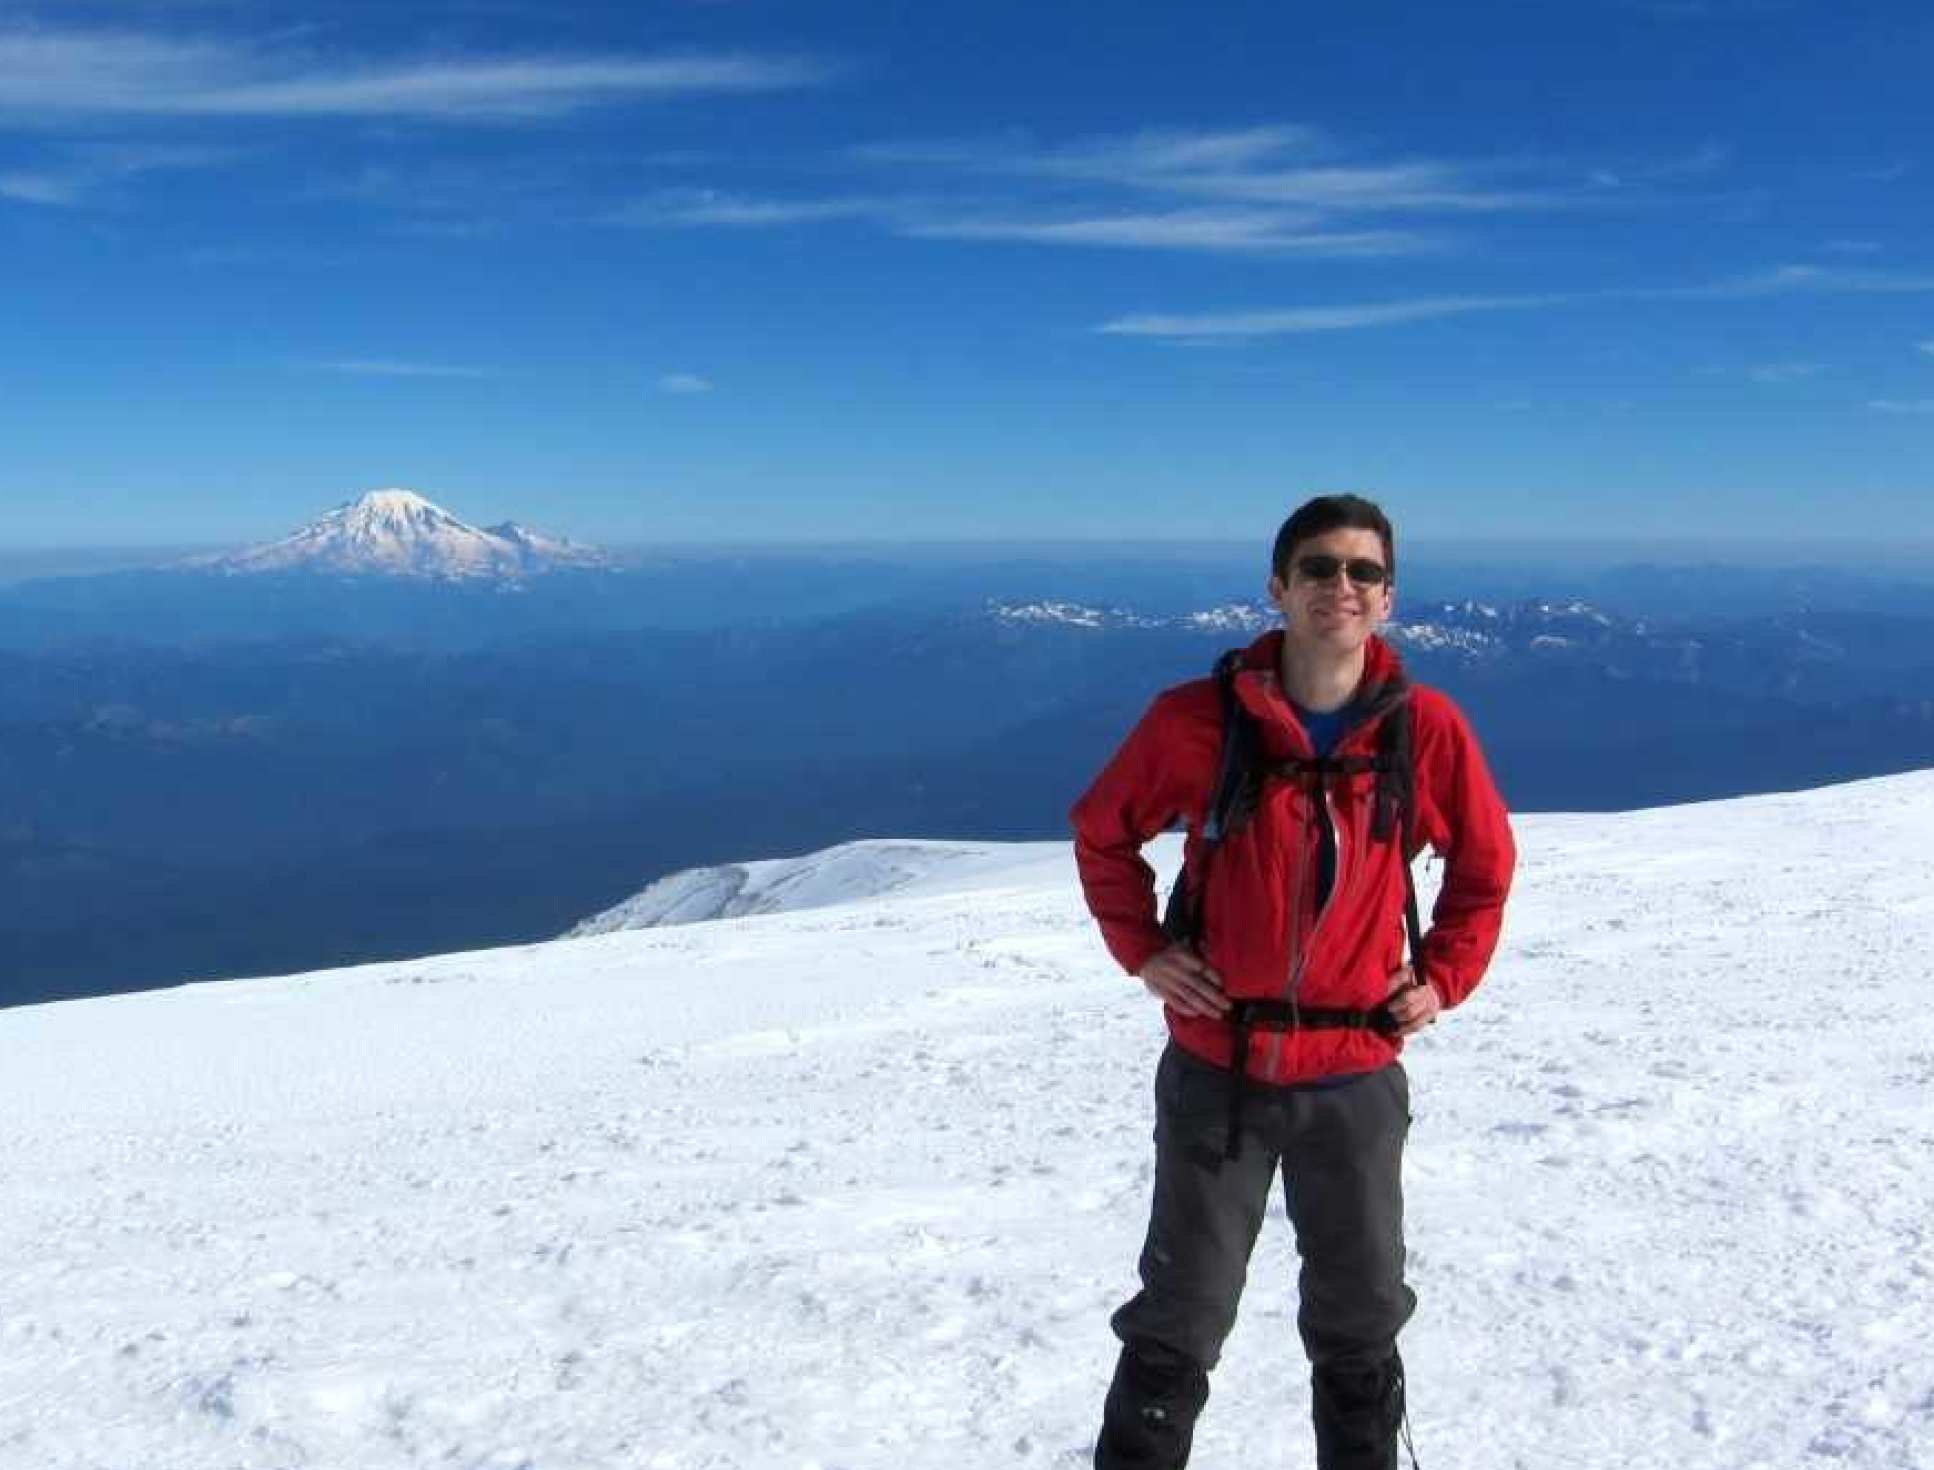 Dr Ceppi on top of Mount Adams, with Mt Rainier in the background 